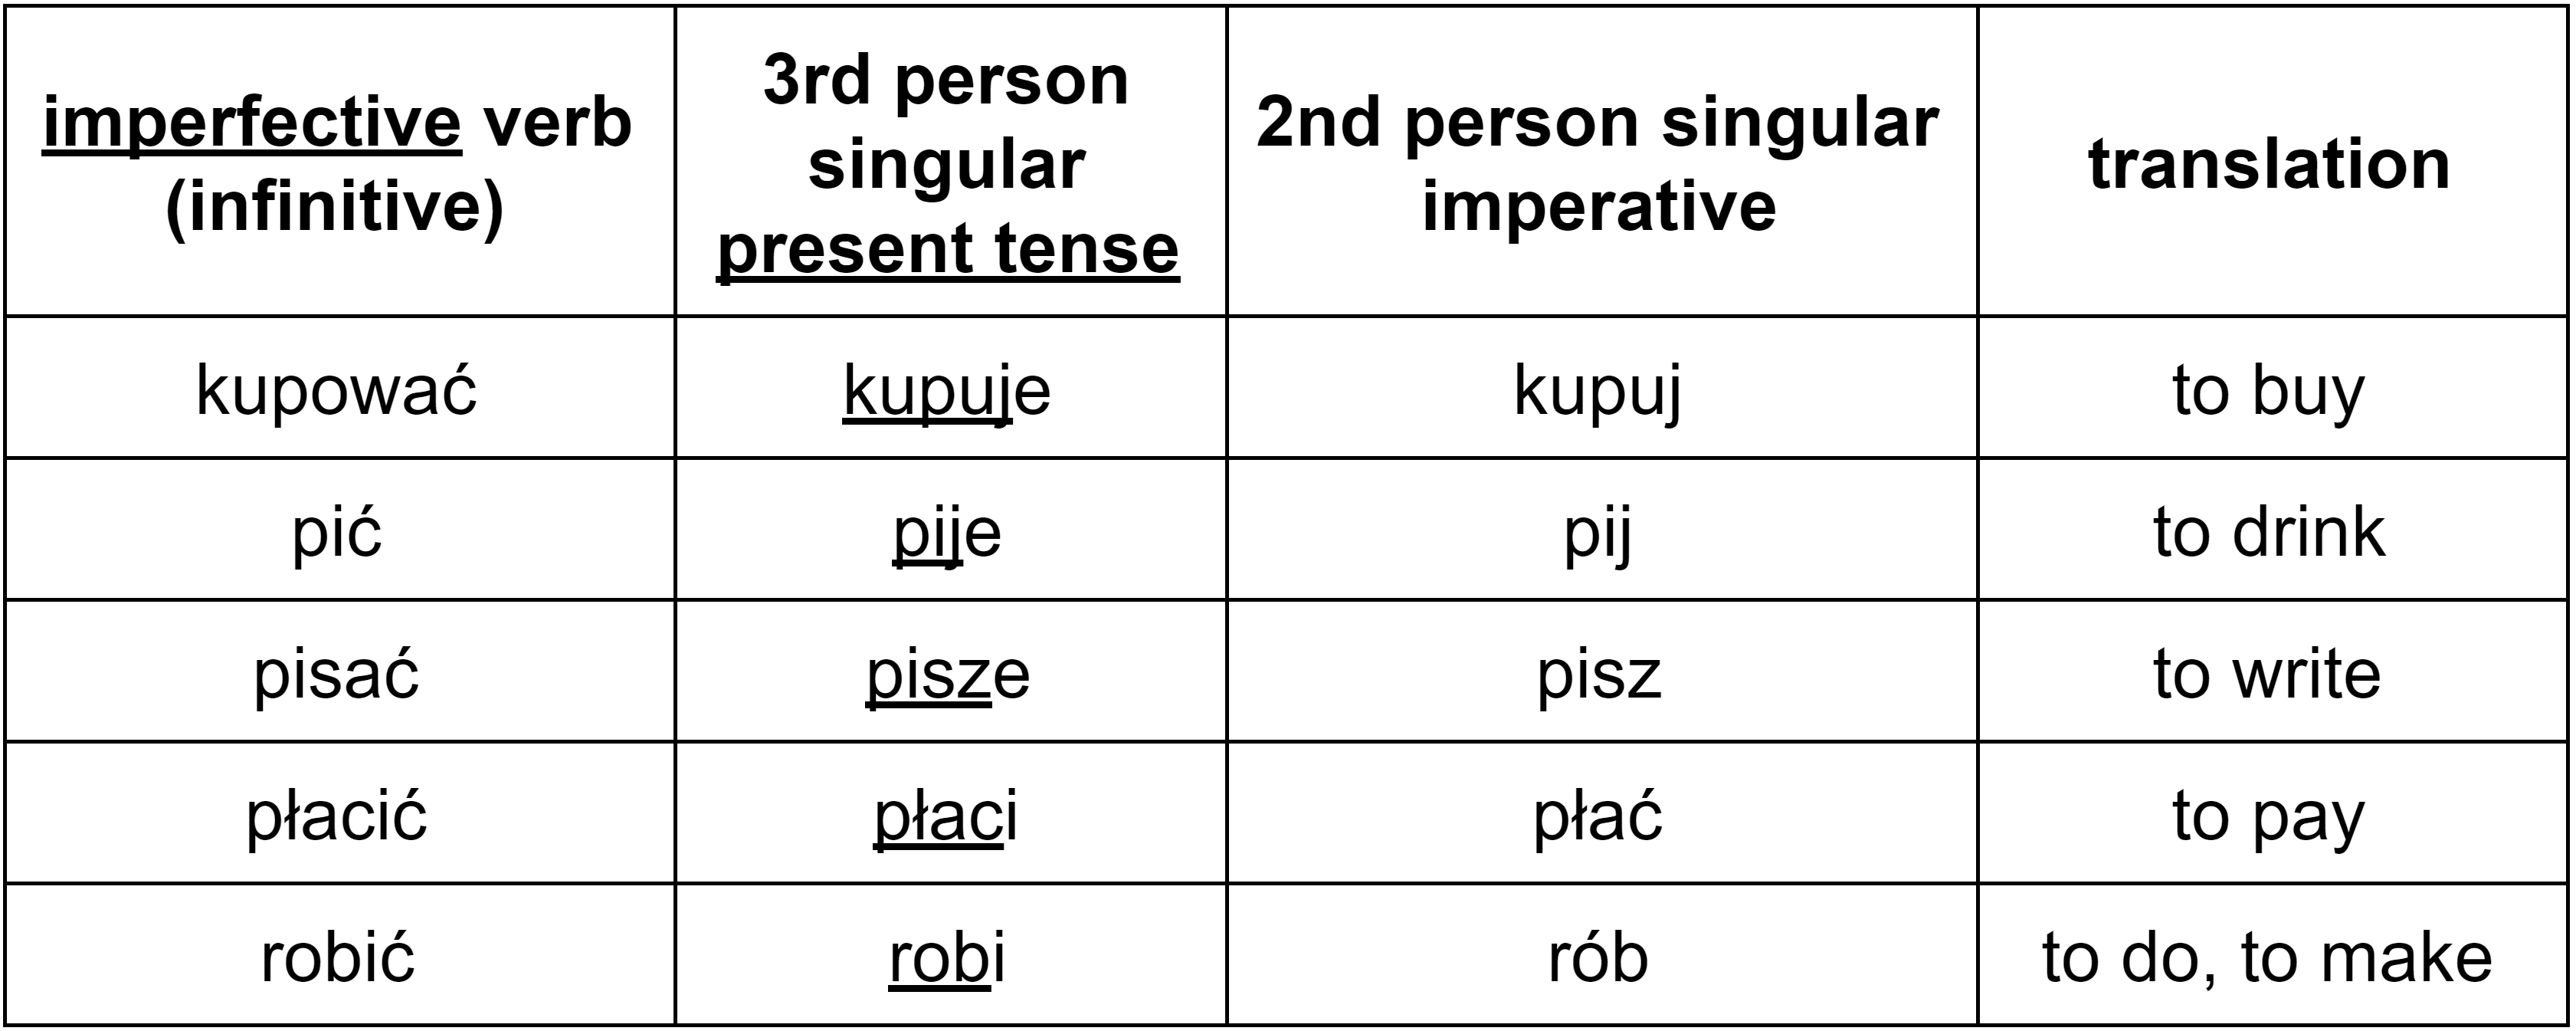 Polish imperfective imperative verbs in the second person singular table